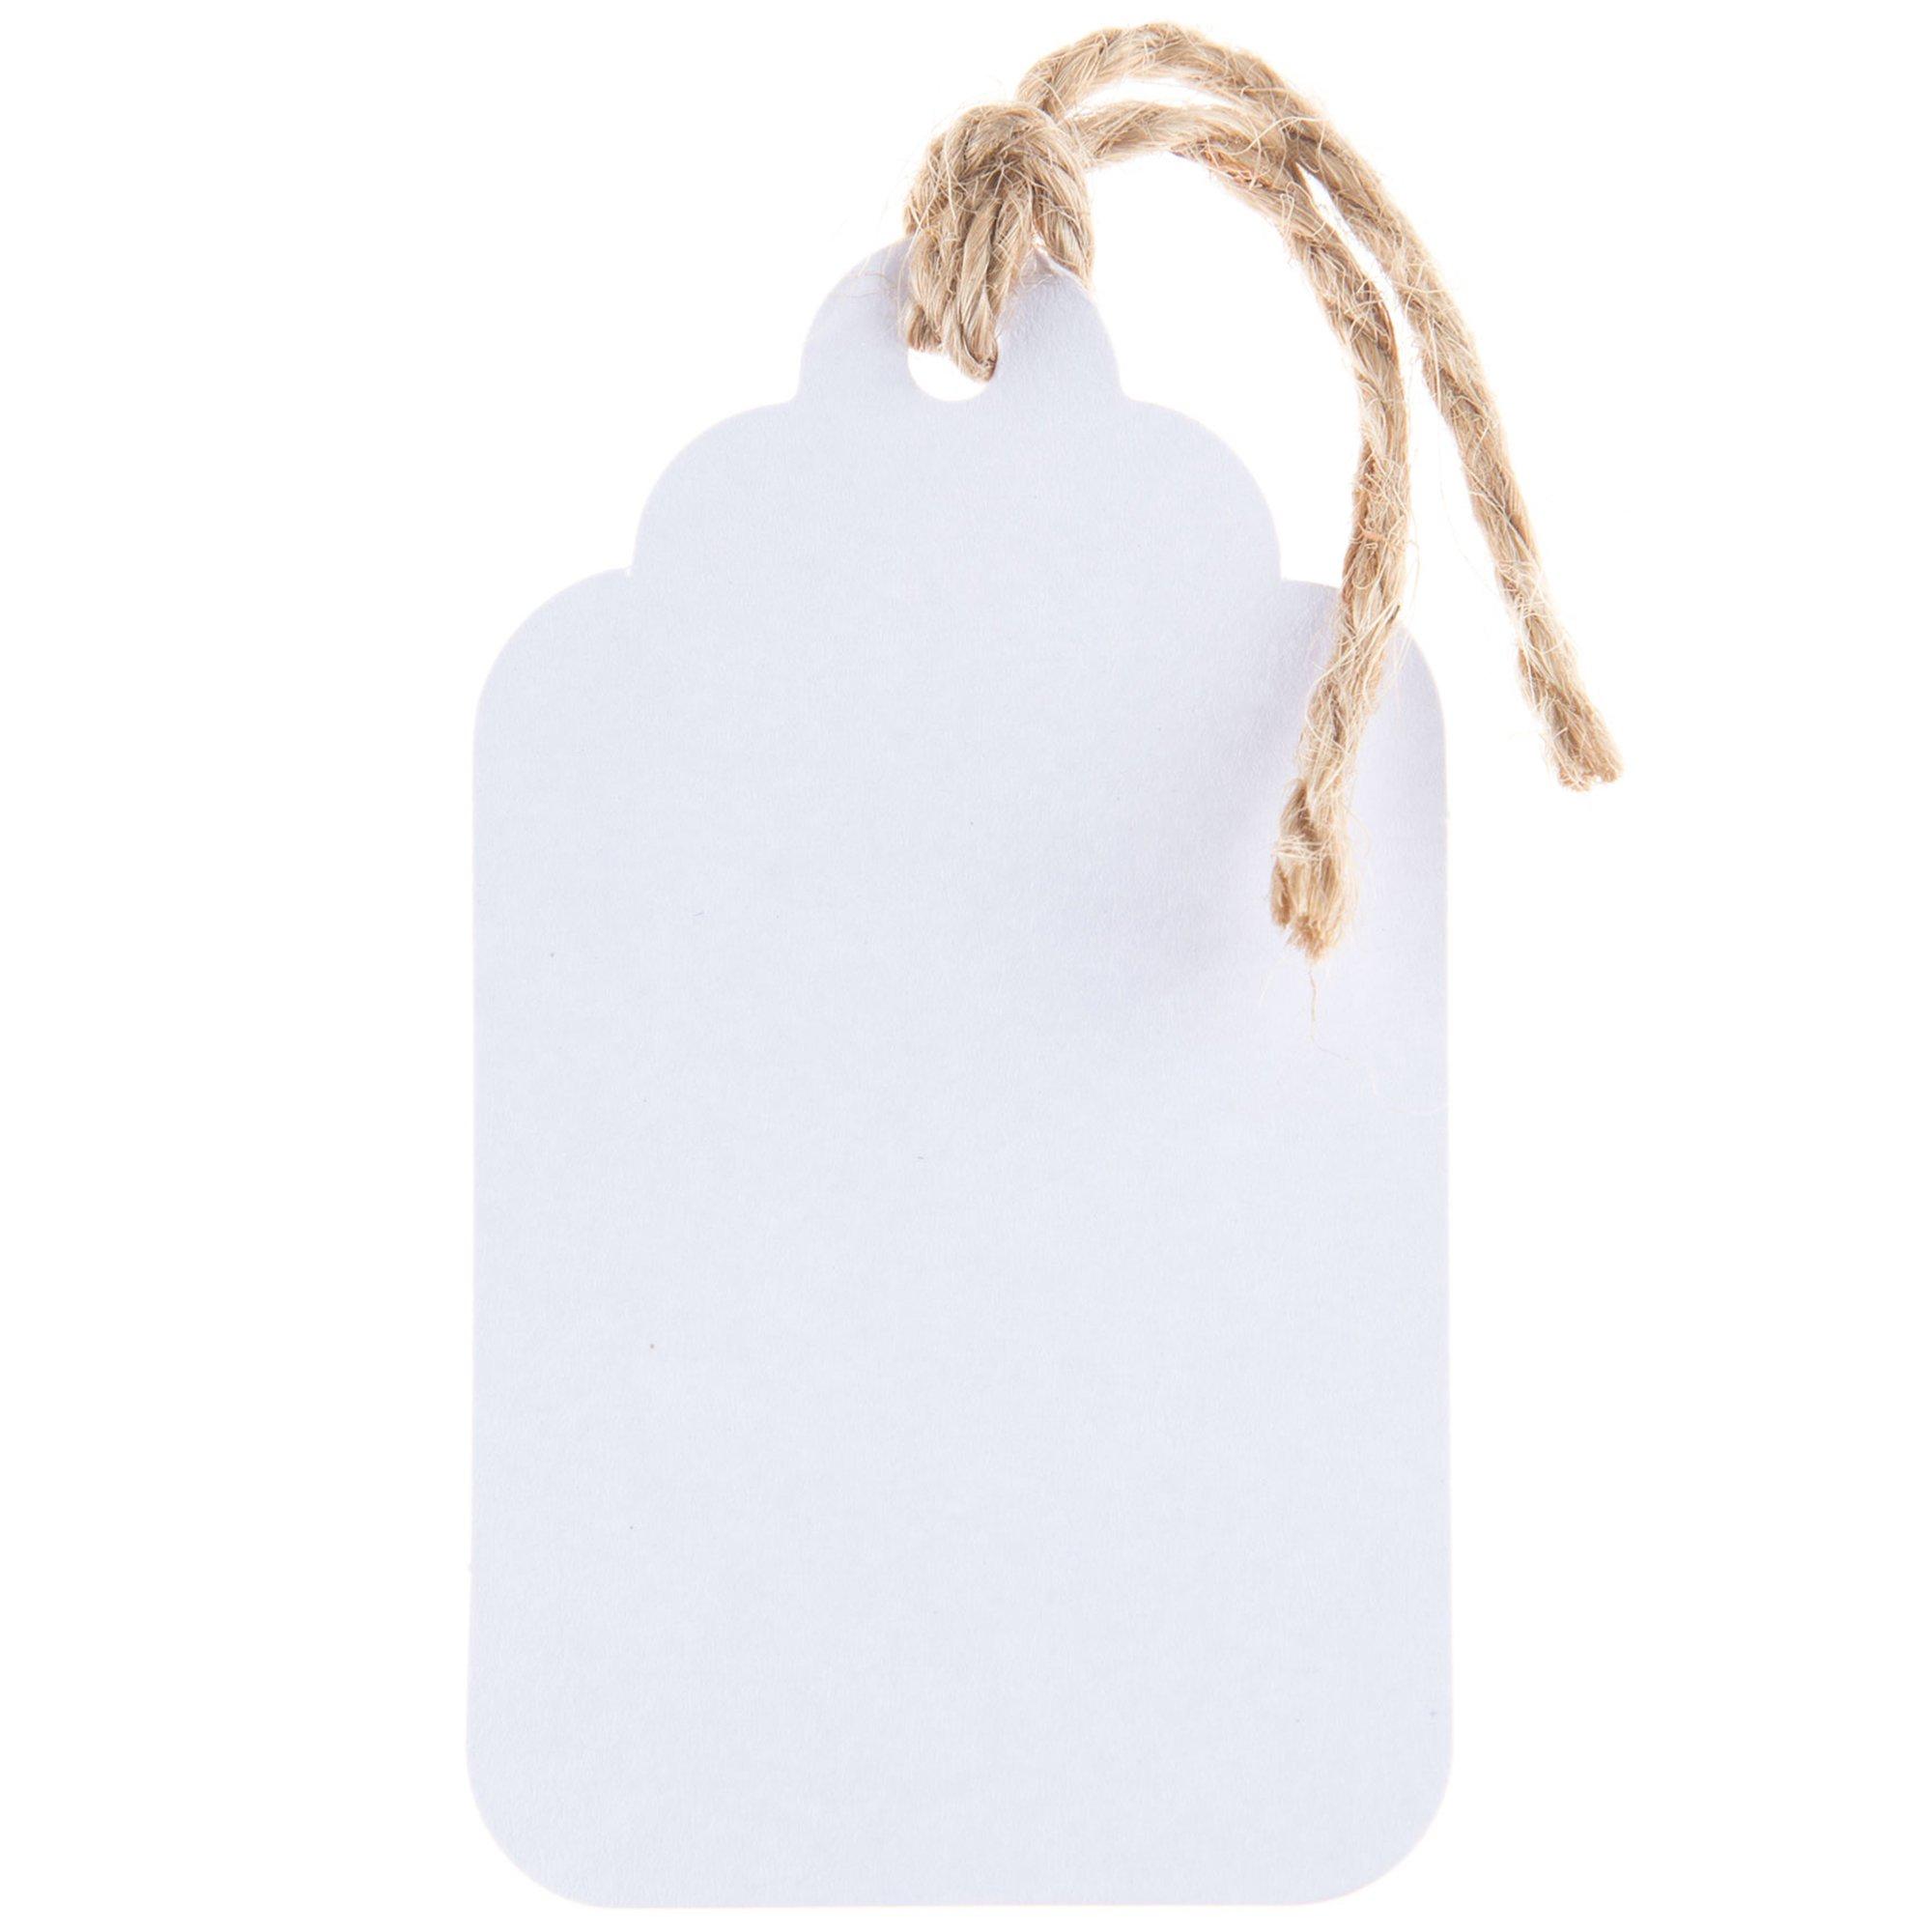 Park Lane Tags with String - Cartouche White - Stickers & Embellishments - Paper Crafts & Scrapbooking